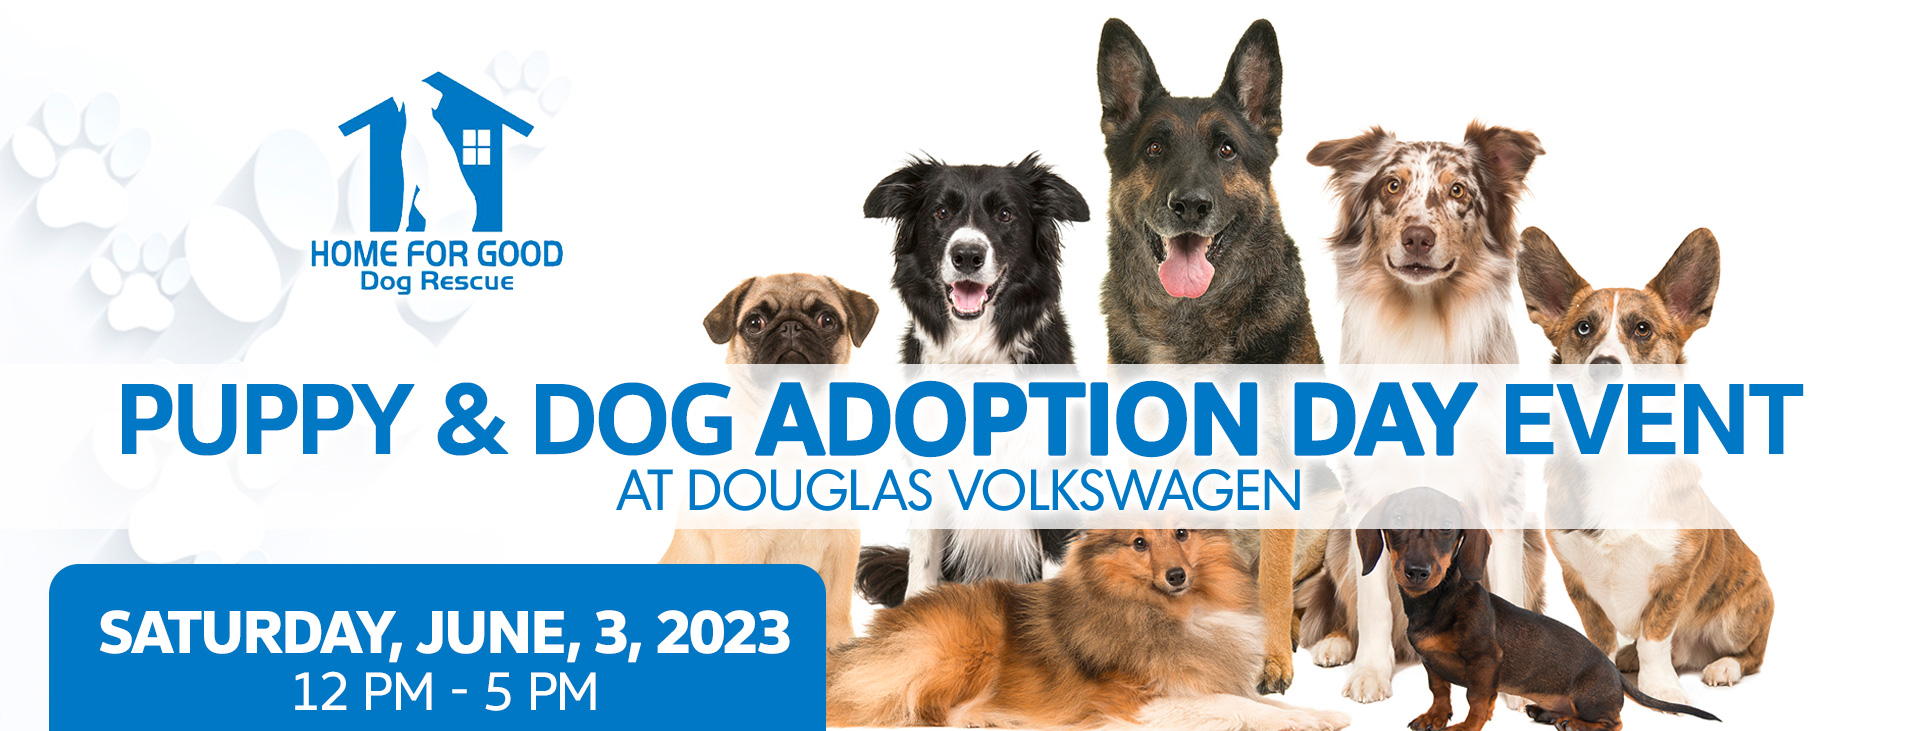 Puppy And Dog Adoption Day Event At